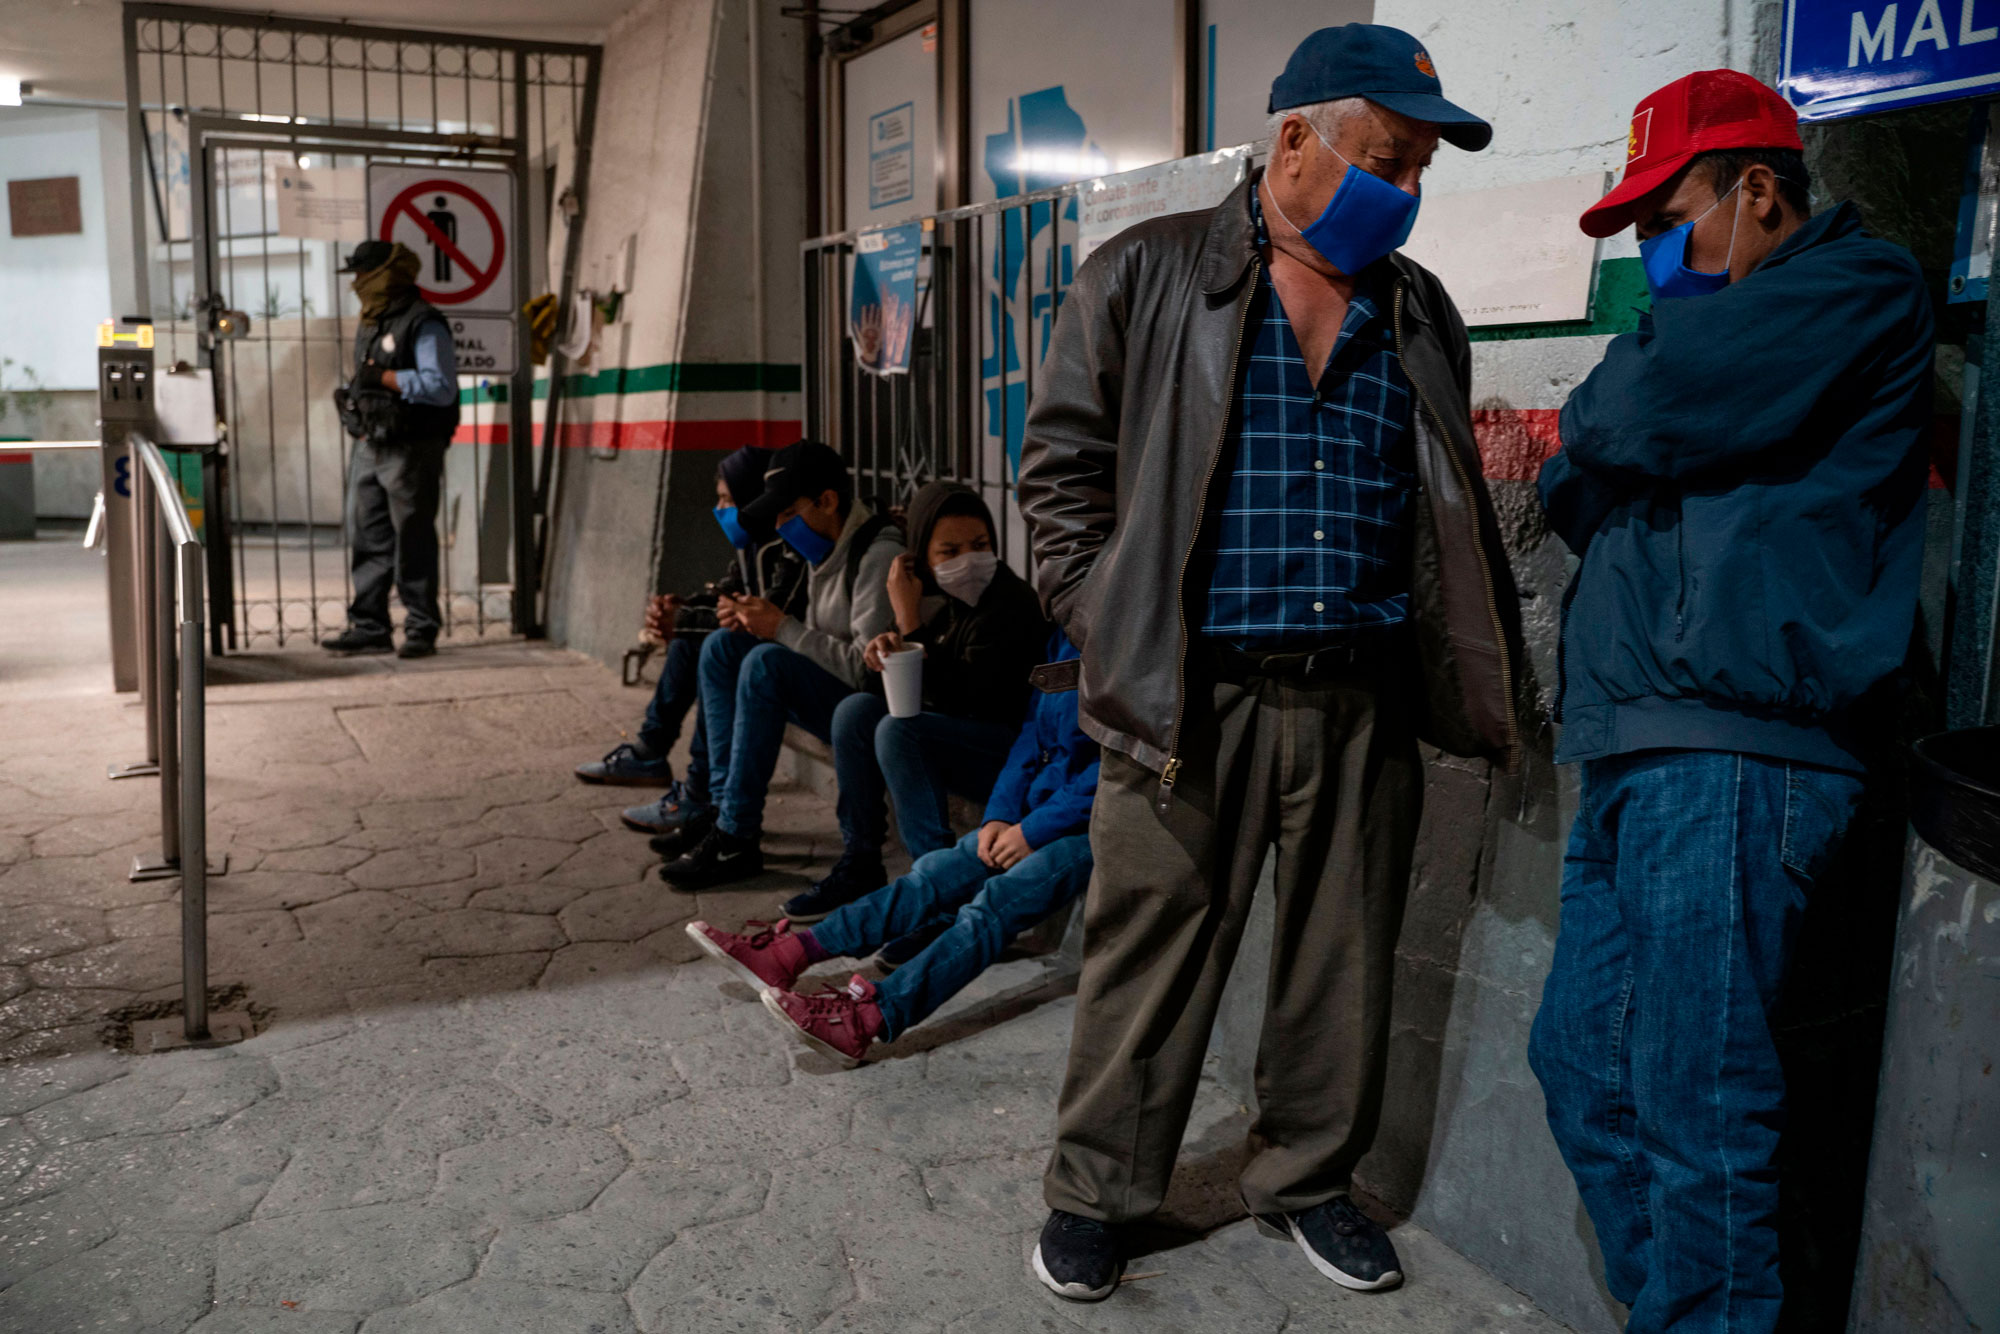 Migrants in the Migrant Protection Protocols program wait to enter the Paso del Norte International Bridge on April 6, in Ciudad Juarez in the state of Chihuahua, Mexico.